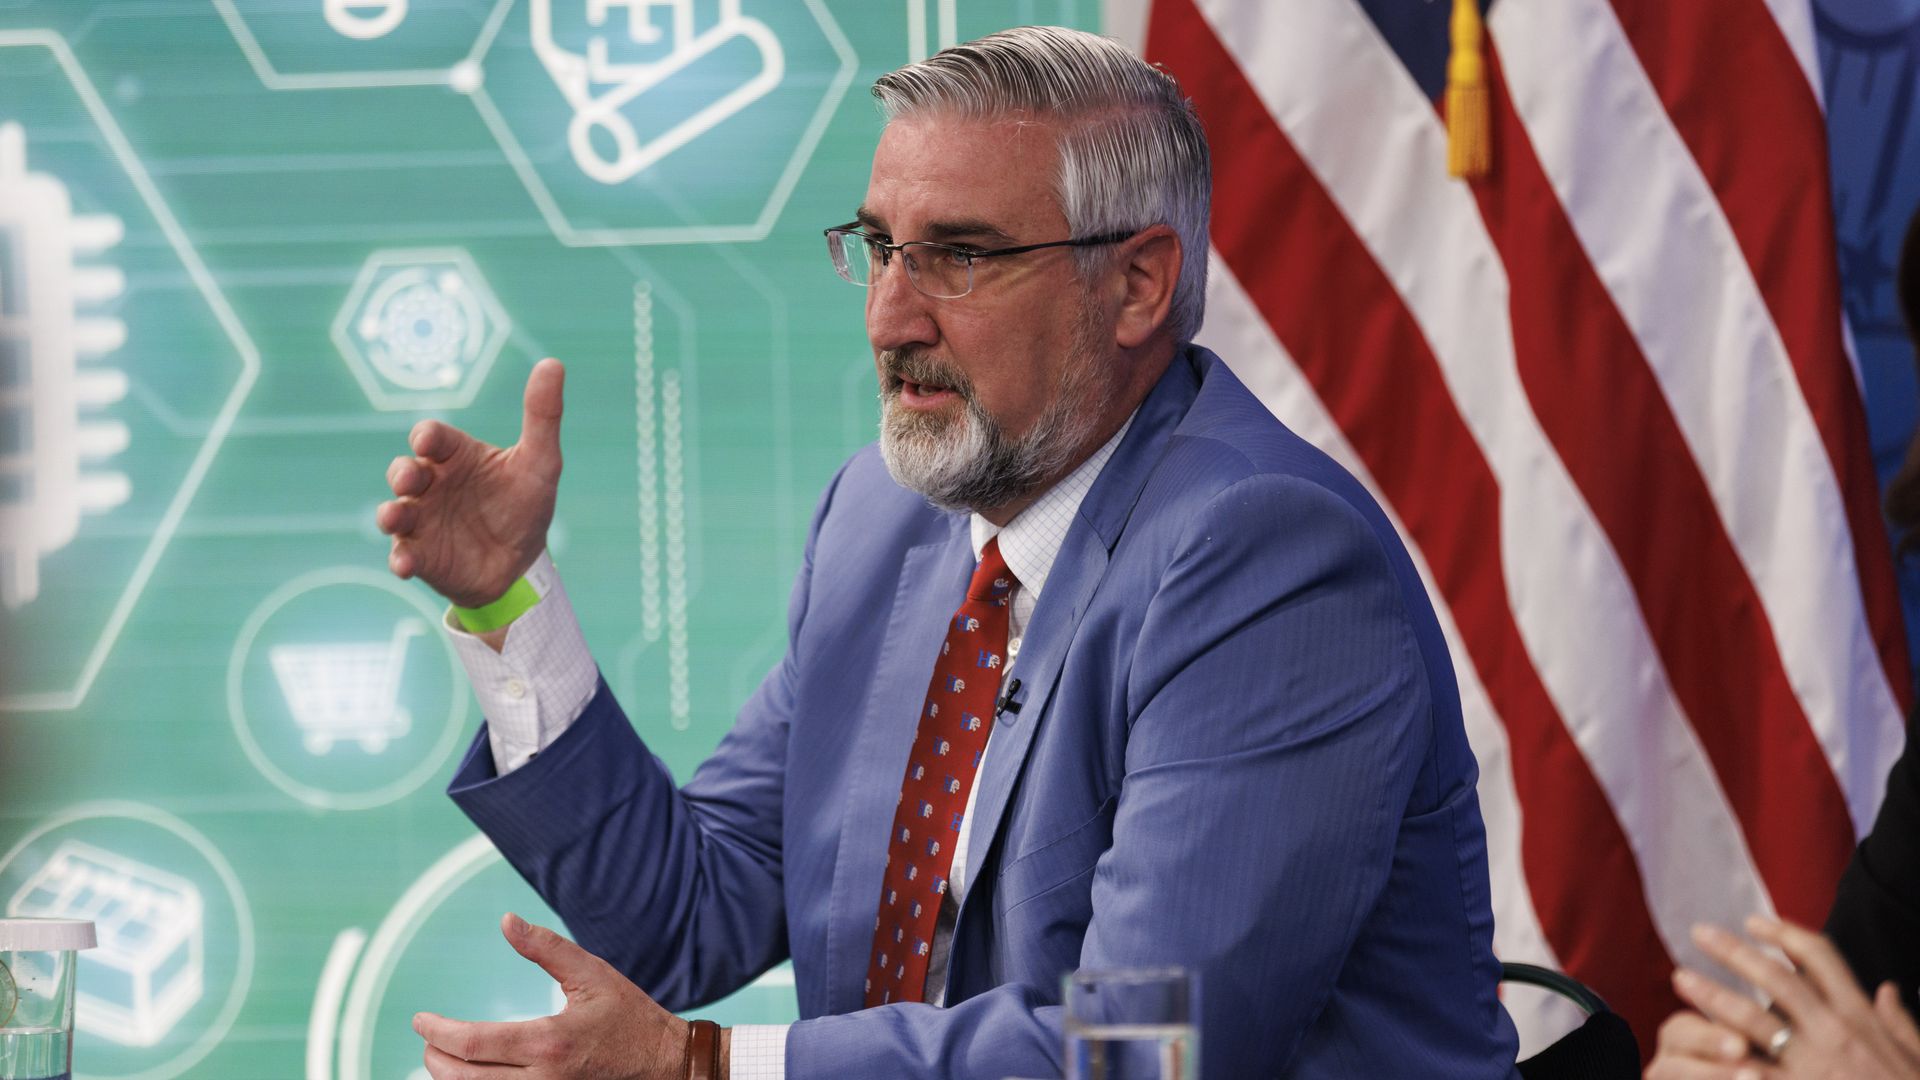  Eric Holcomb, governor of Indiana, during a meeting with President Biden, business leaders and governors in the Eisenhower Executive Office Building in Washington, D.C., U.S., on Wednesday, March 9.